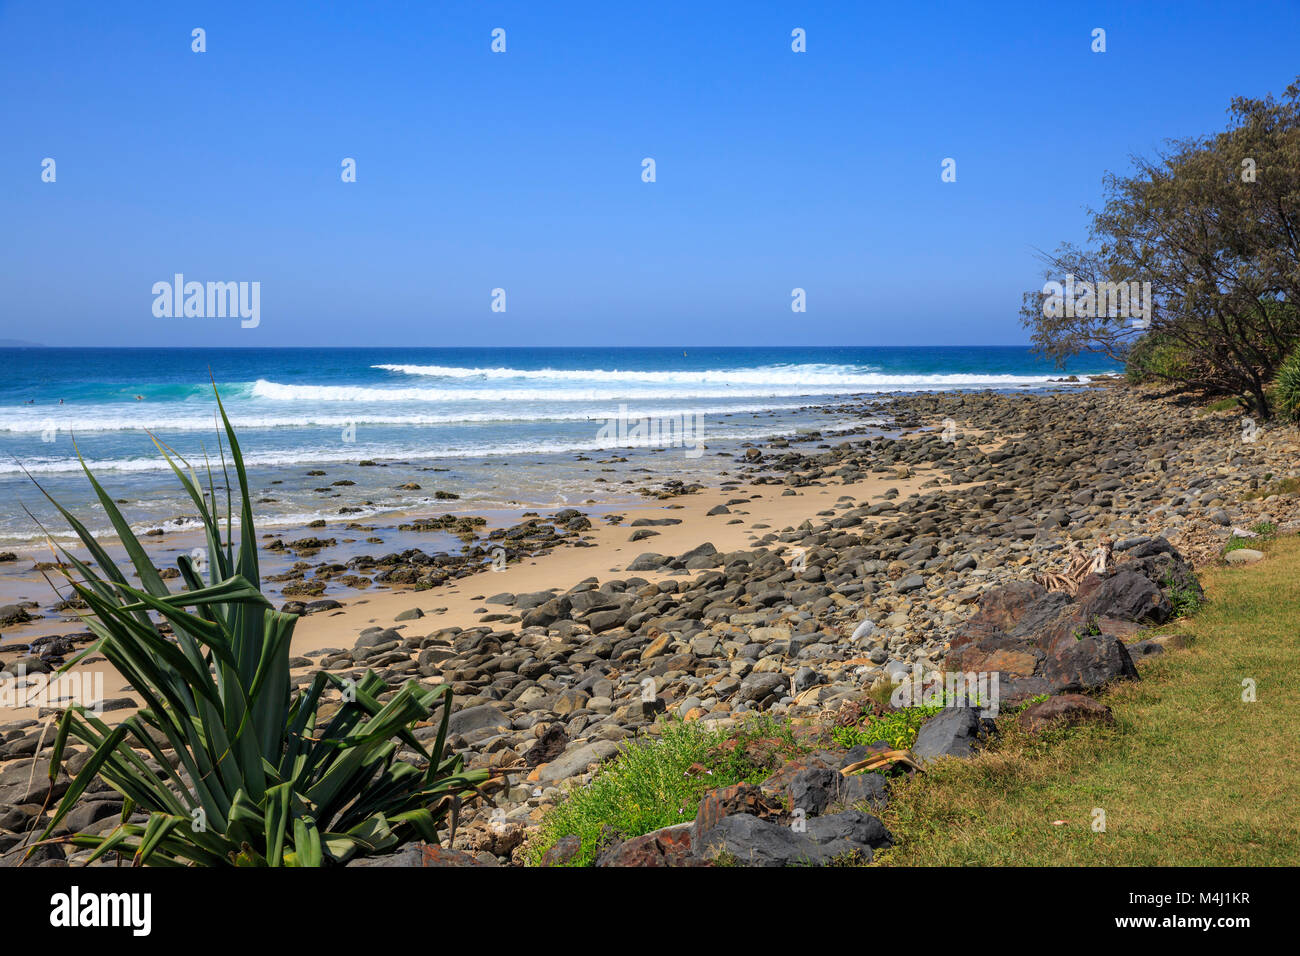 Surf beach at Crescent head on the mid north coast of New South Wales,Australia Stock Photo